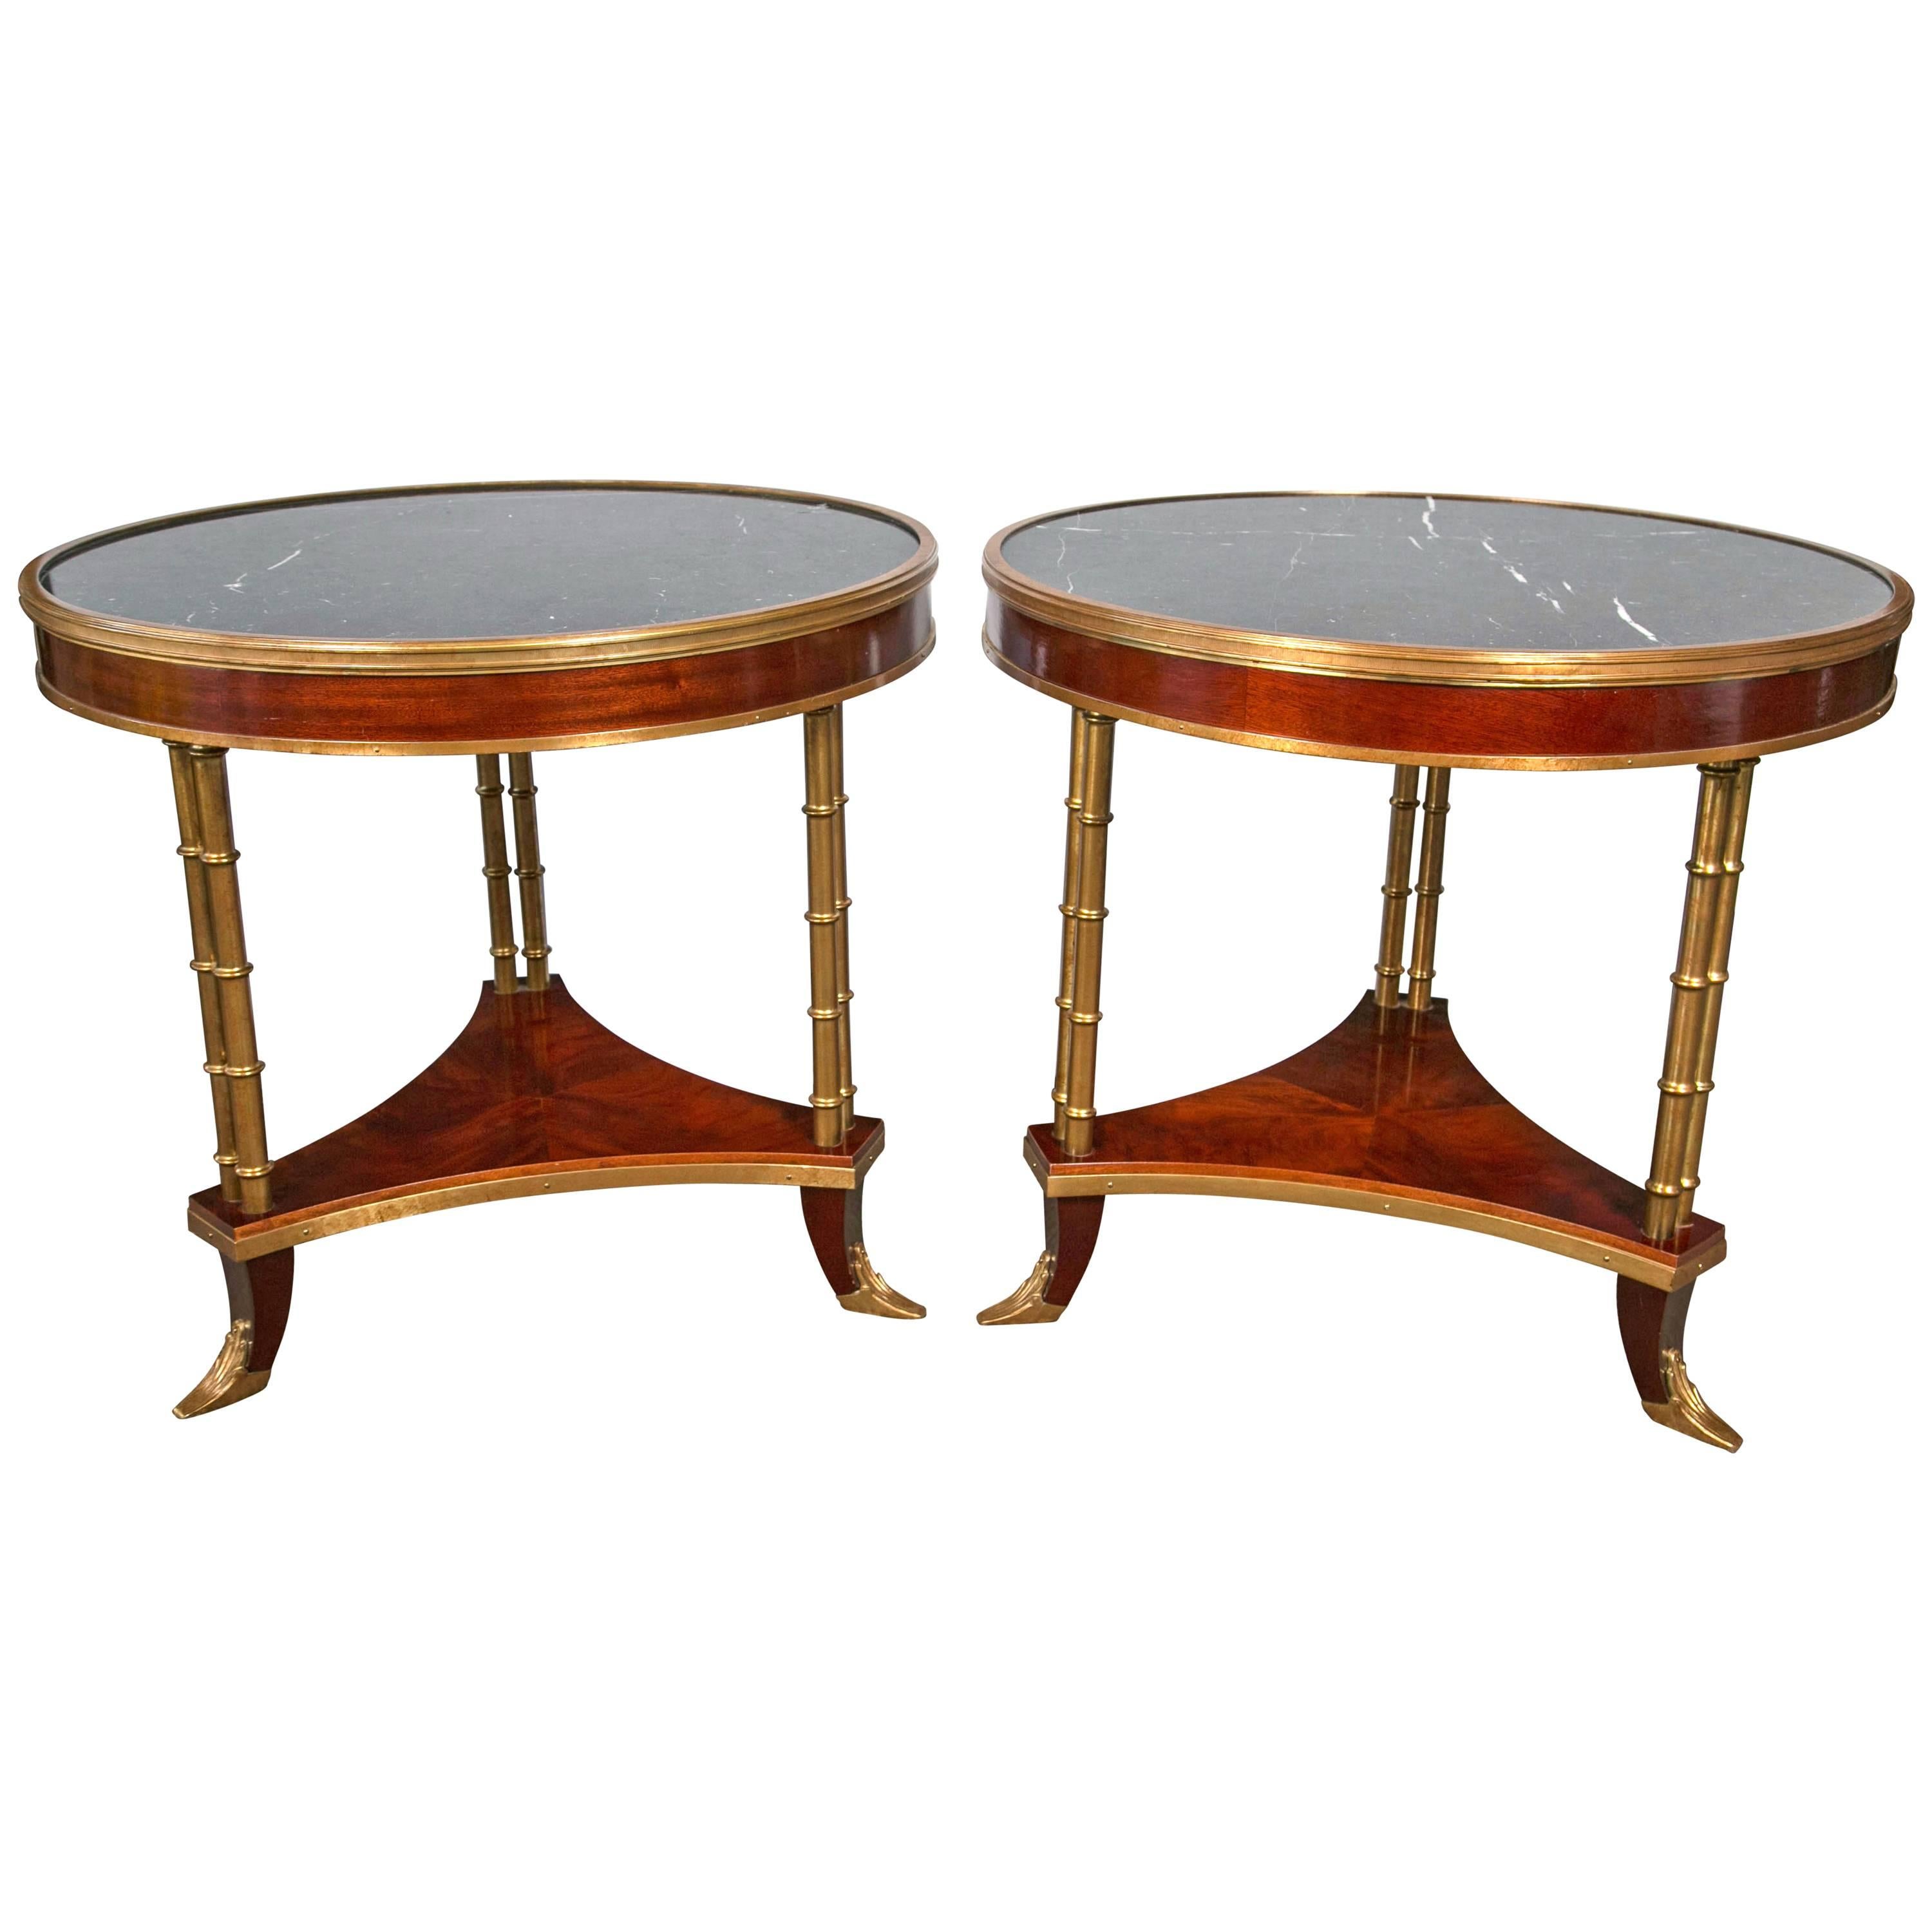 Pair of Maison Jansen Style Marble-Top Bamboo Form Bouillotte Tables